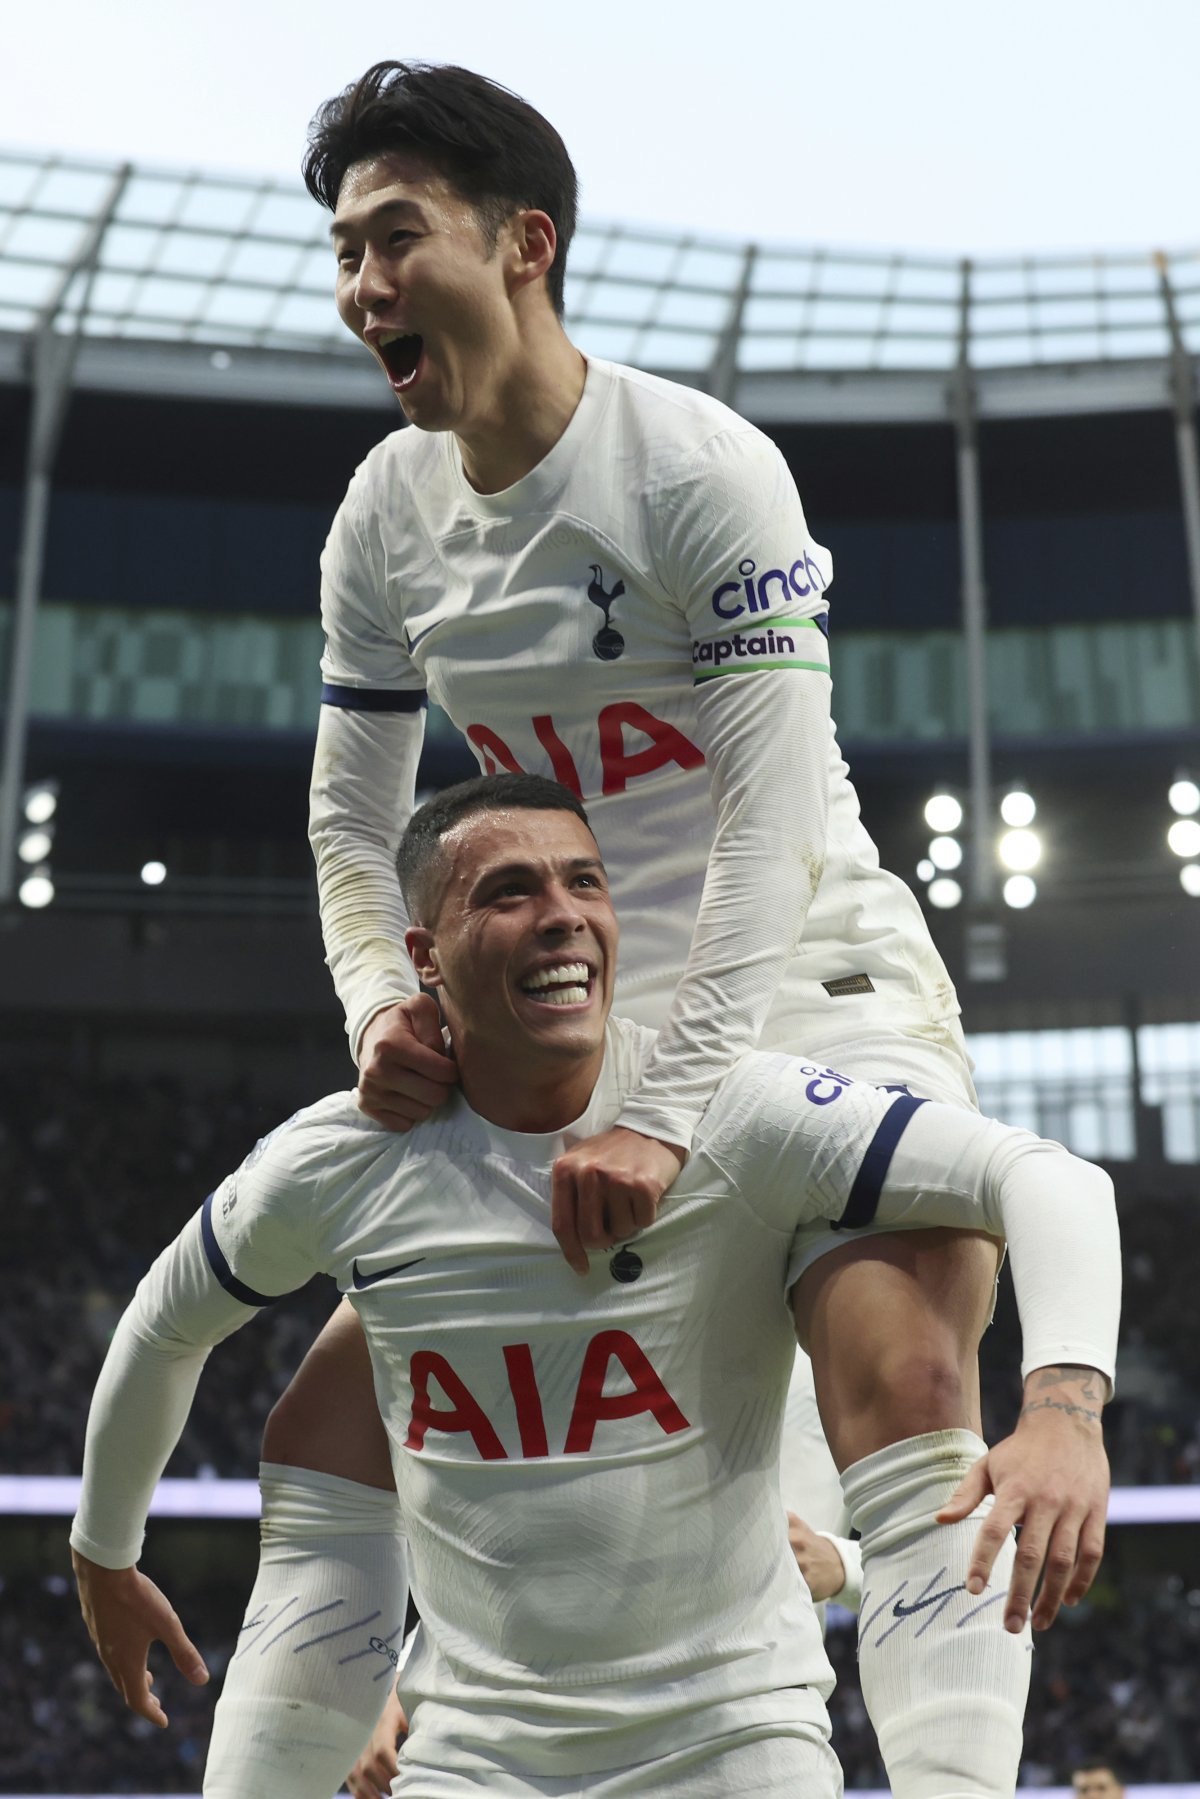 Tottenham's Son Heung-min (above) is happy while riding on the shoulders of Pedro Foro, who scored the team's third goal in the 13th minute of the English Premier League game against Nottingham on the 8th. London = AP Newsis